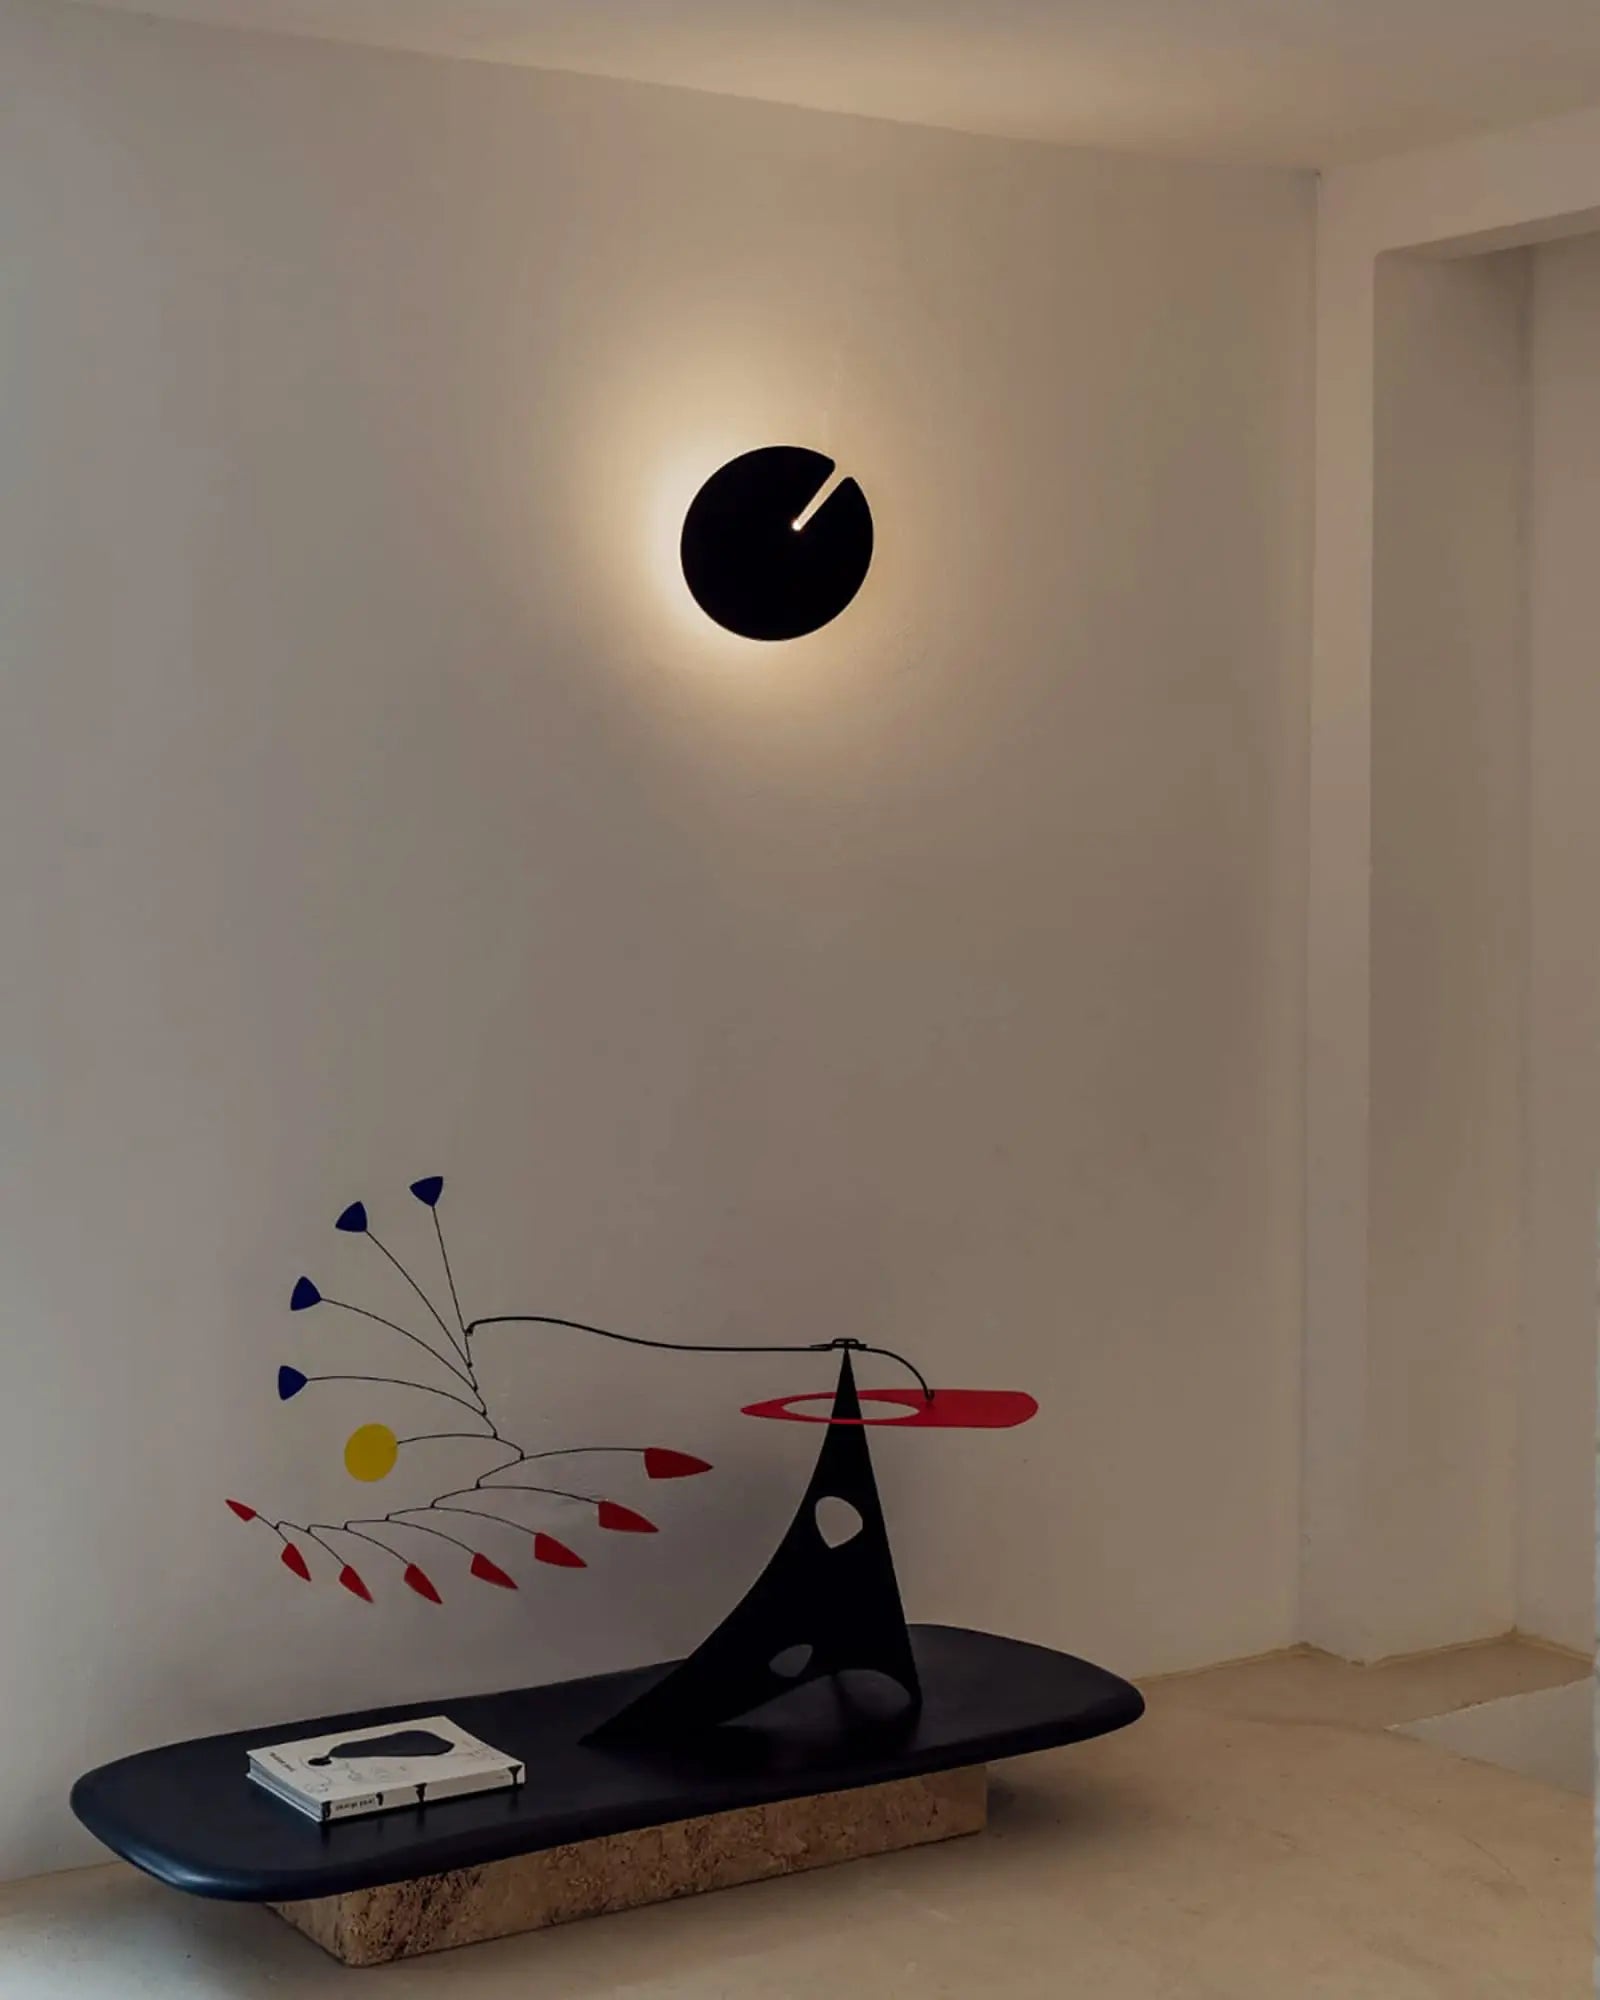 Symphony wall light in a living area